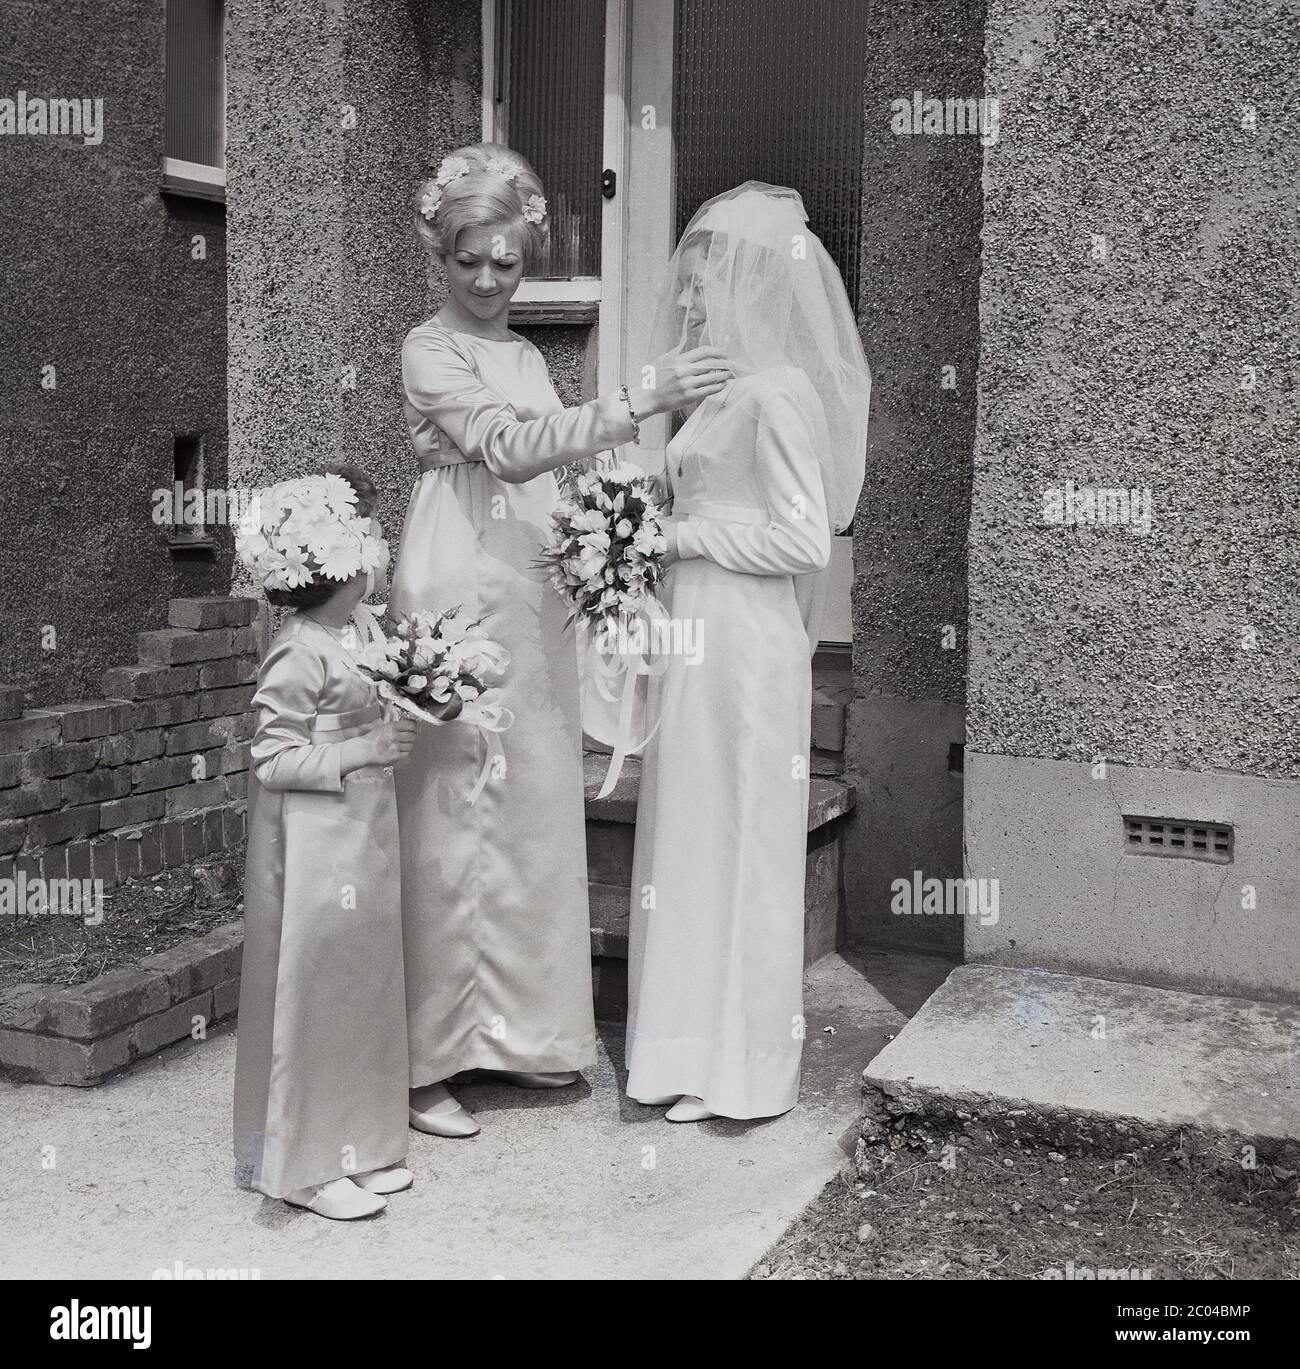 1960s, historical, last minute preparations from her chief bridesmaid for the young bride in her wedding dress and veil standing outside the front door in the porch of a pebble-dash suburban house, South London, England, UK. A little flower girl stands with them holding her bouquet. Stock Photo